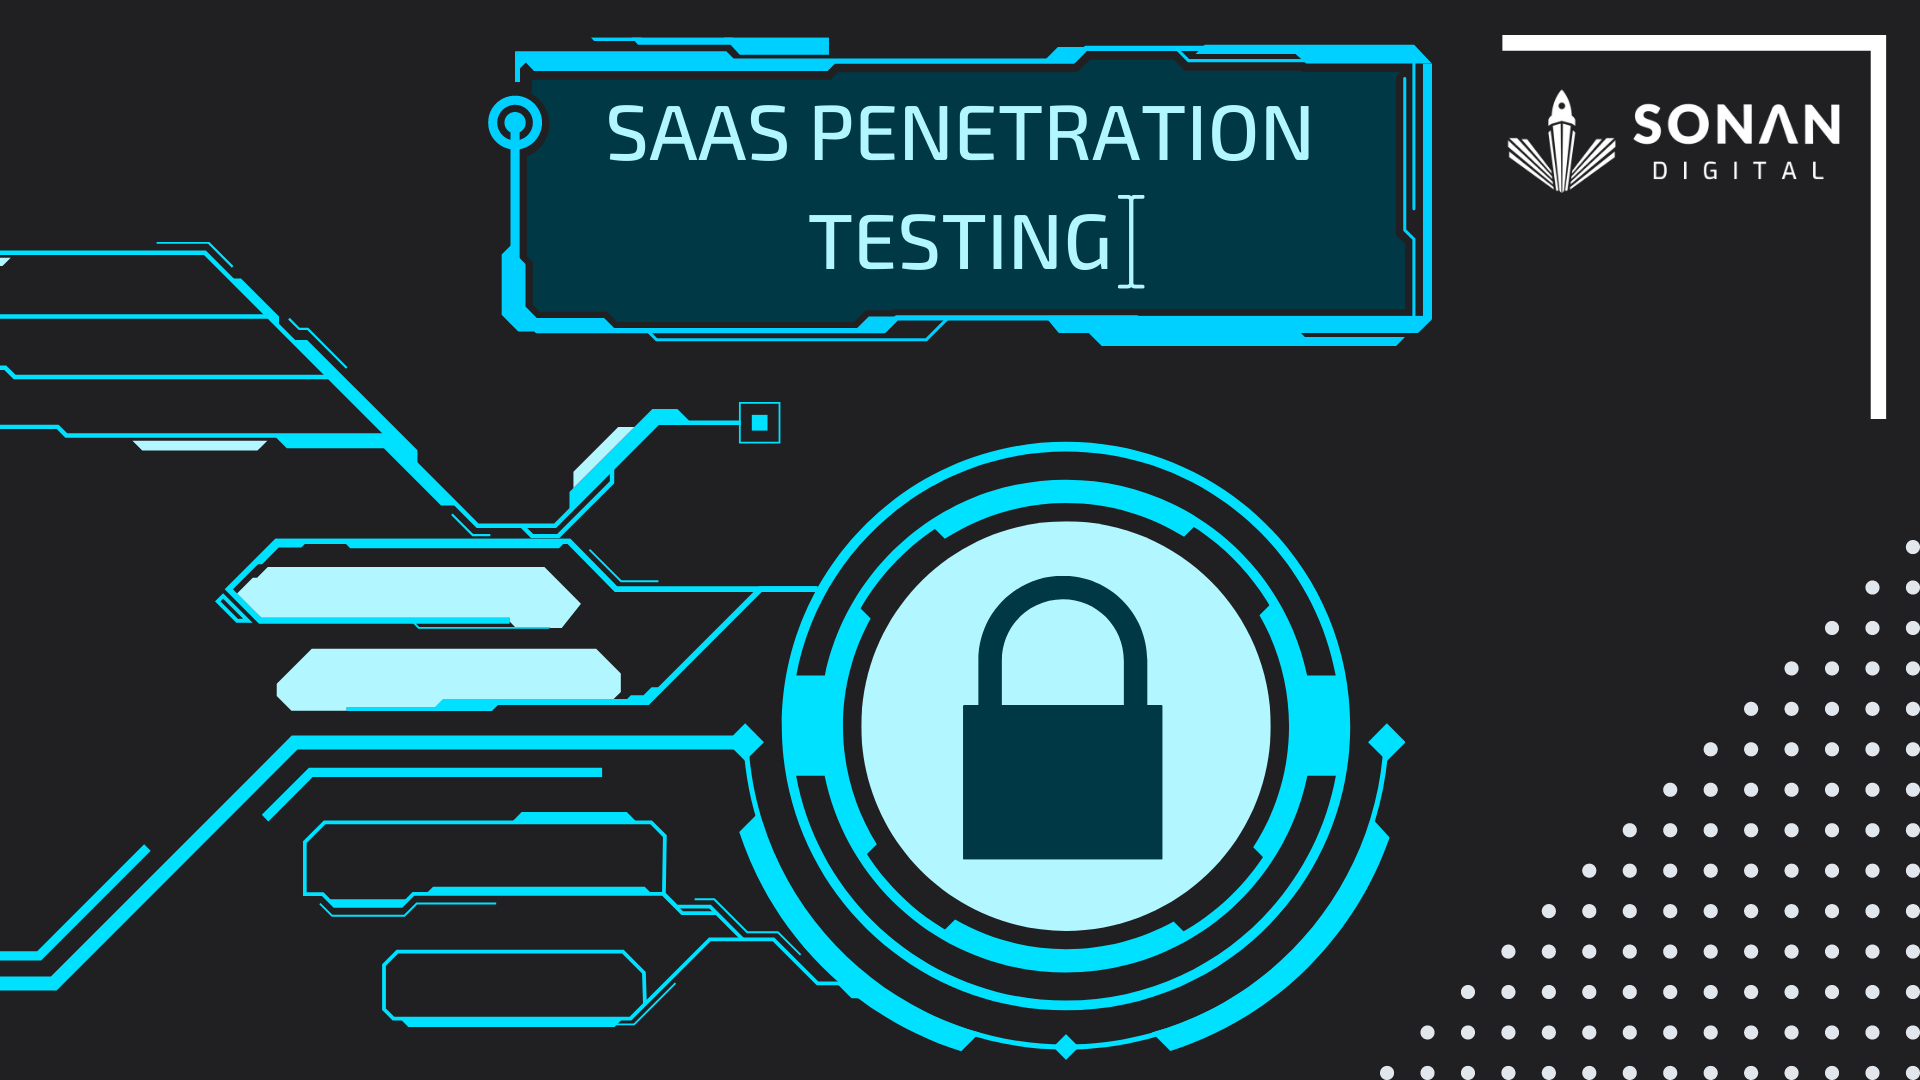 Penetration Testing as a Service for B2B SaaS: What You Need to Know